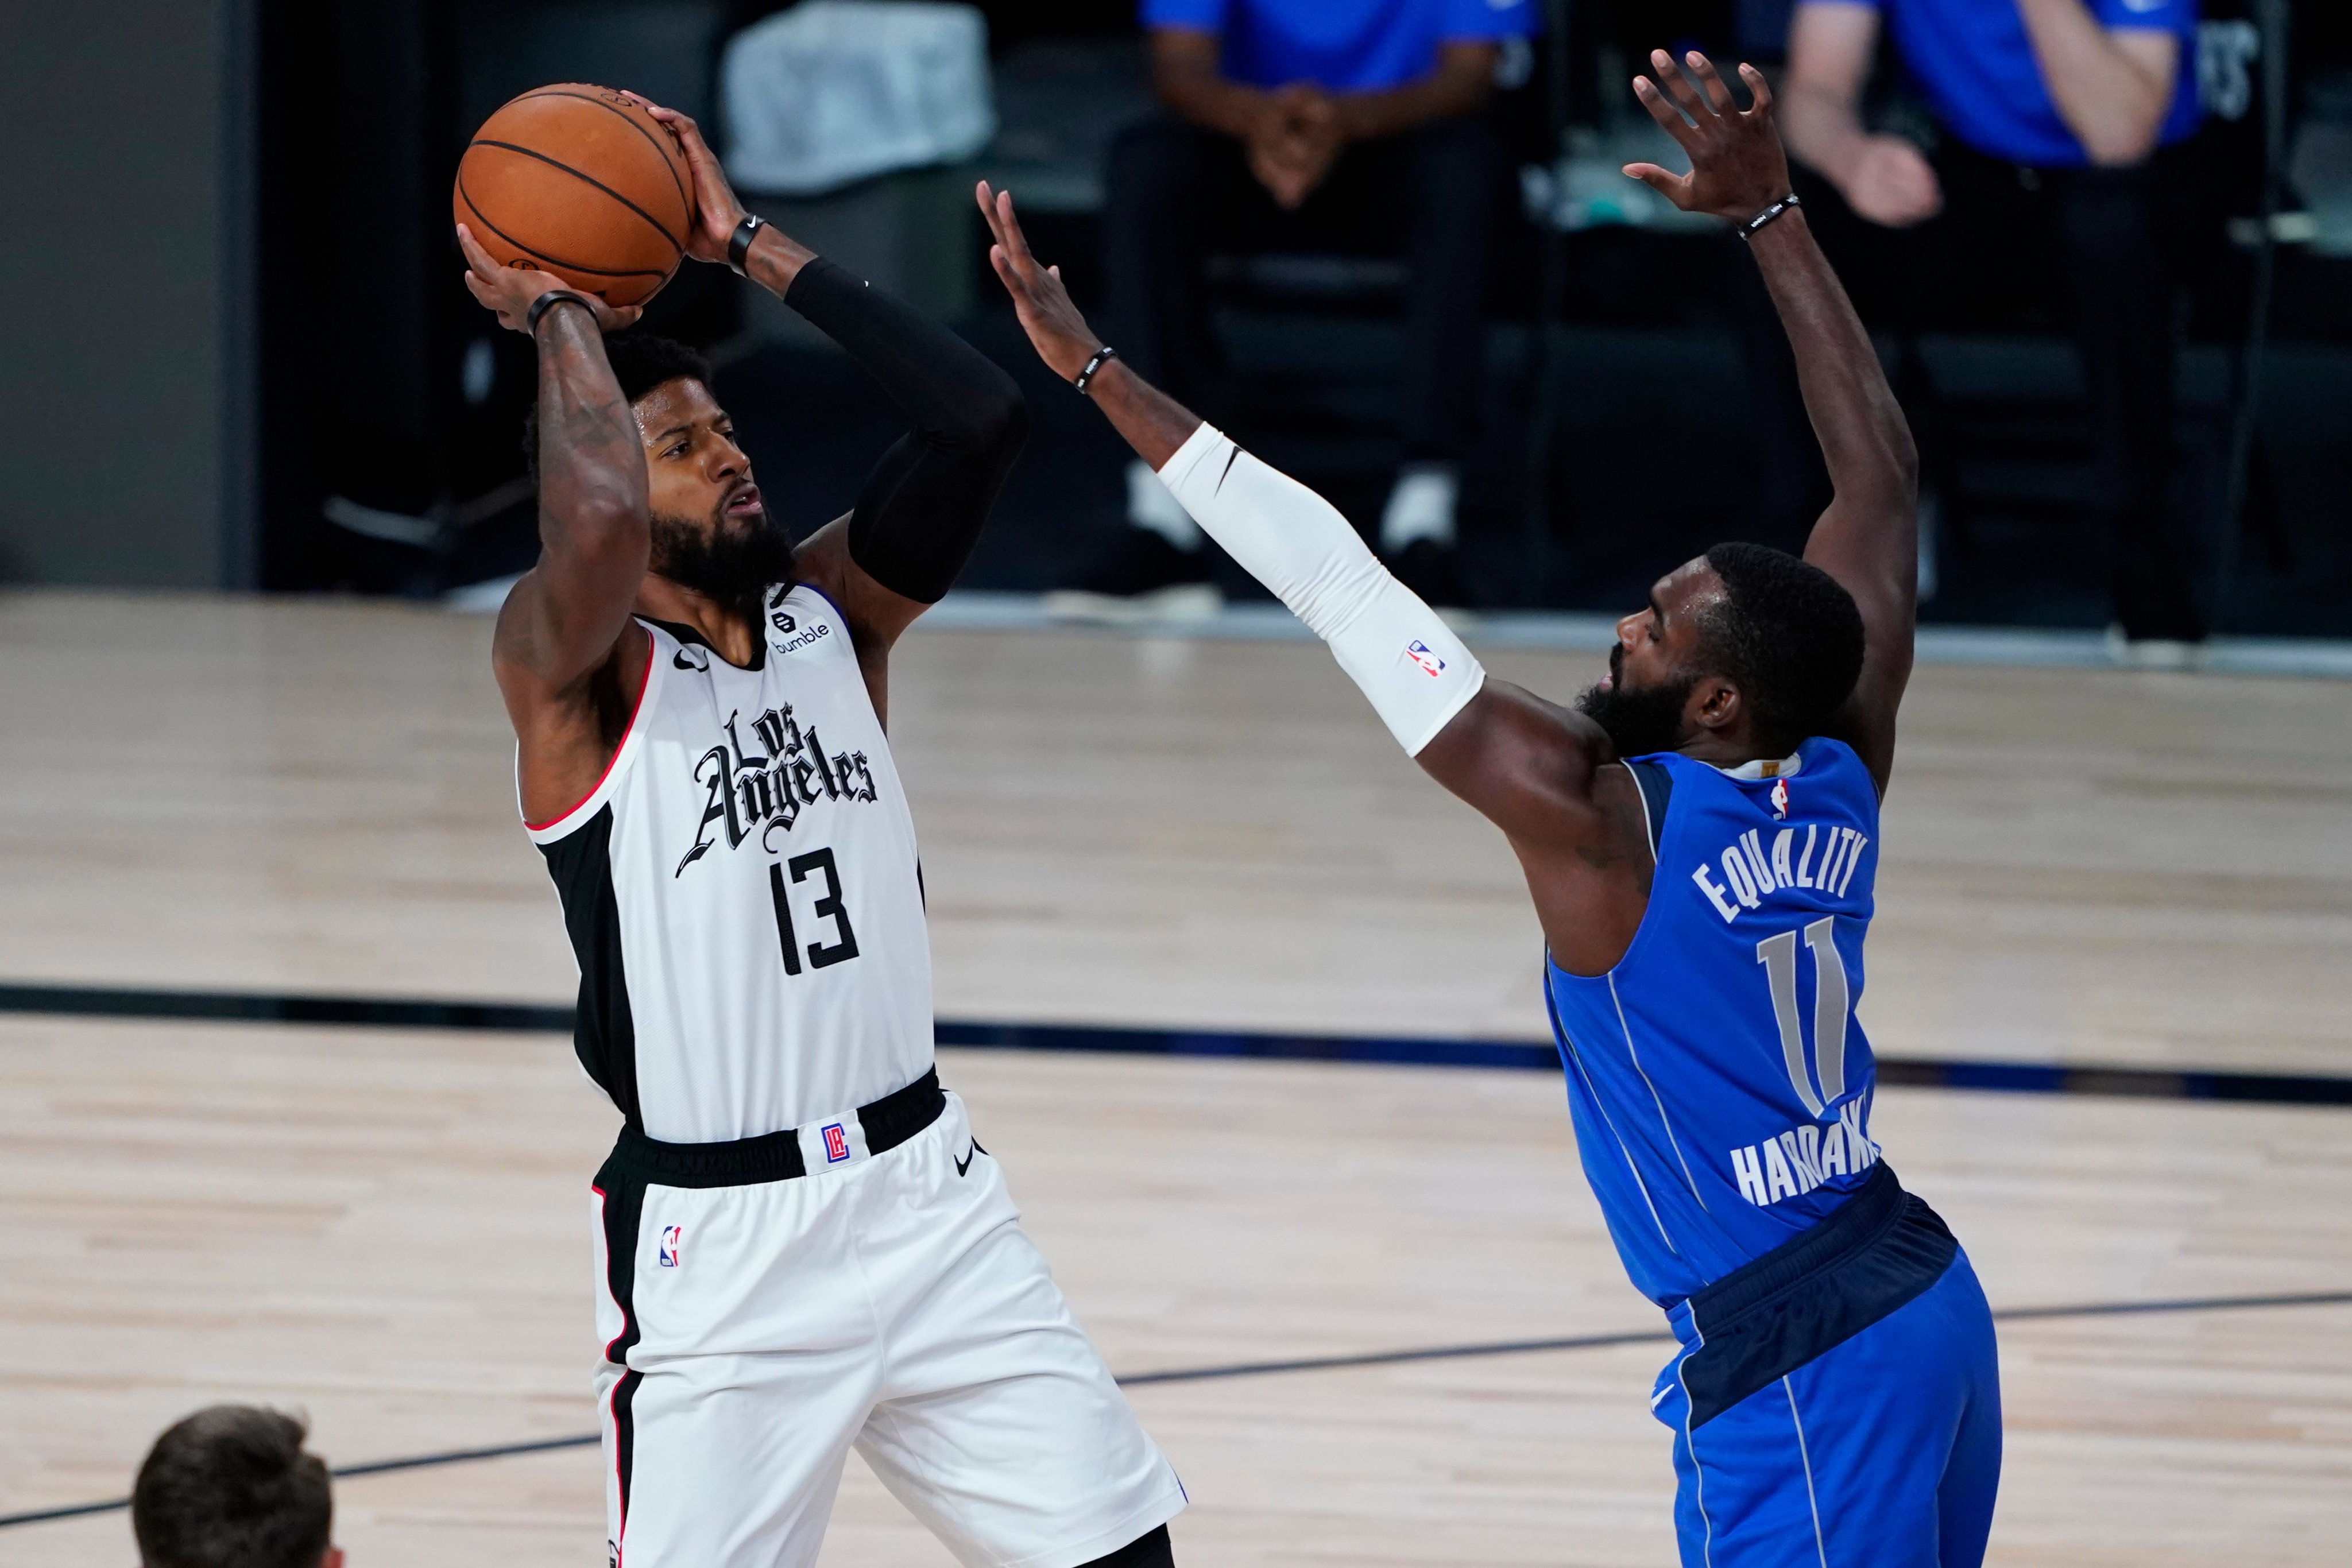 ESPN Stats & Info on X: Paul George's 8 3-pt FG is tied for the most in a  playoff game in franchise history. The only other player to hit that mark  was